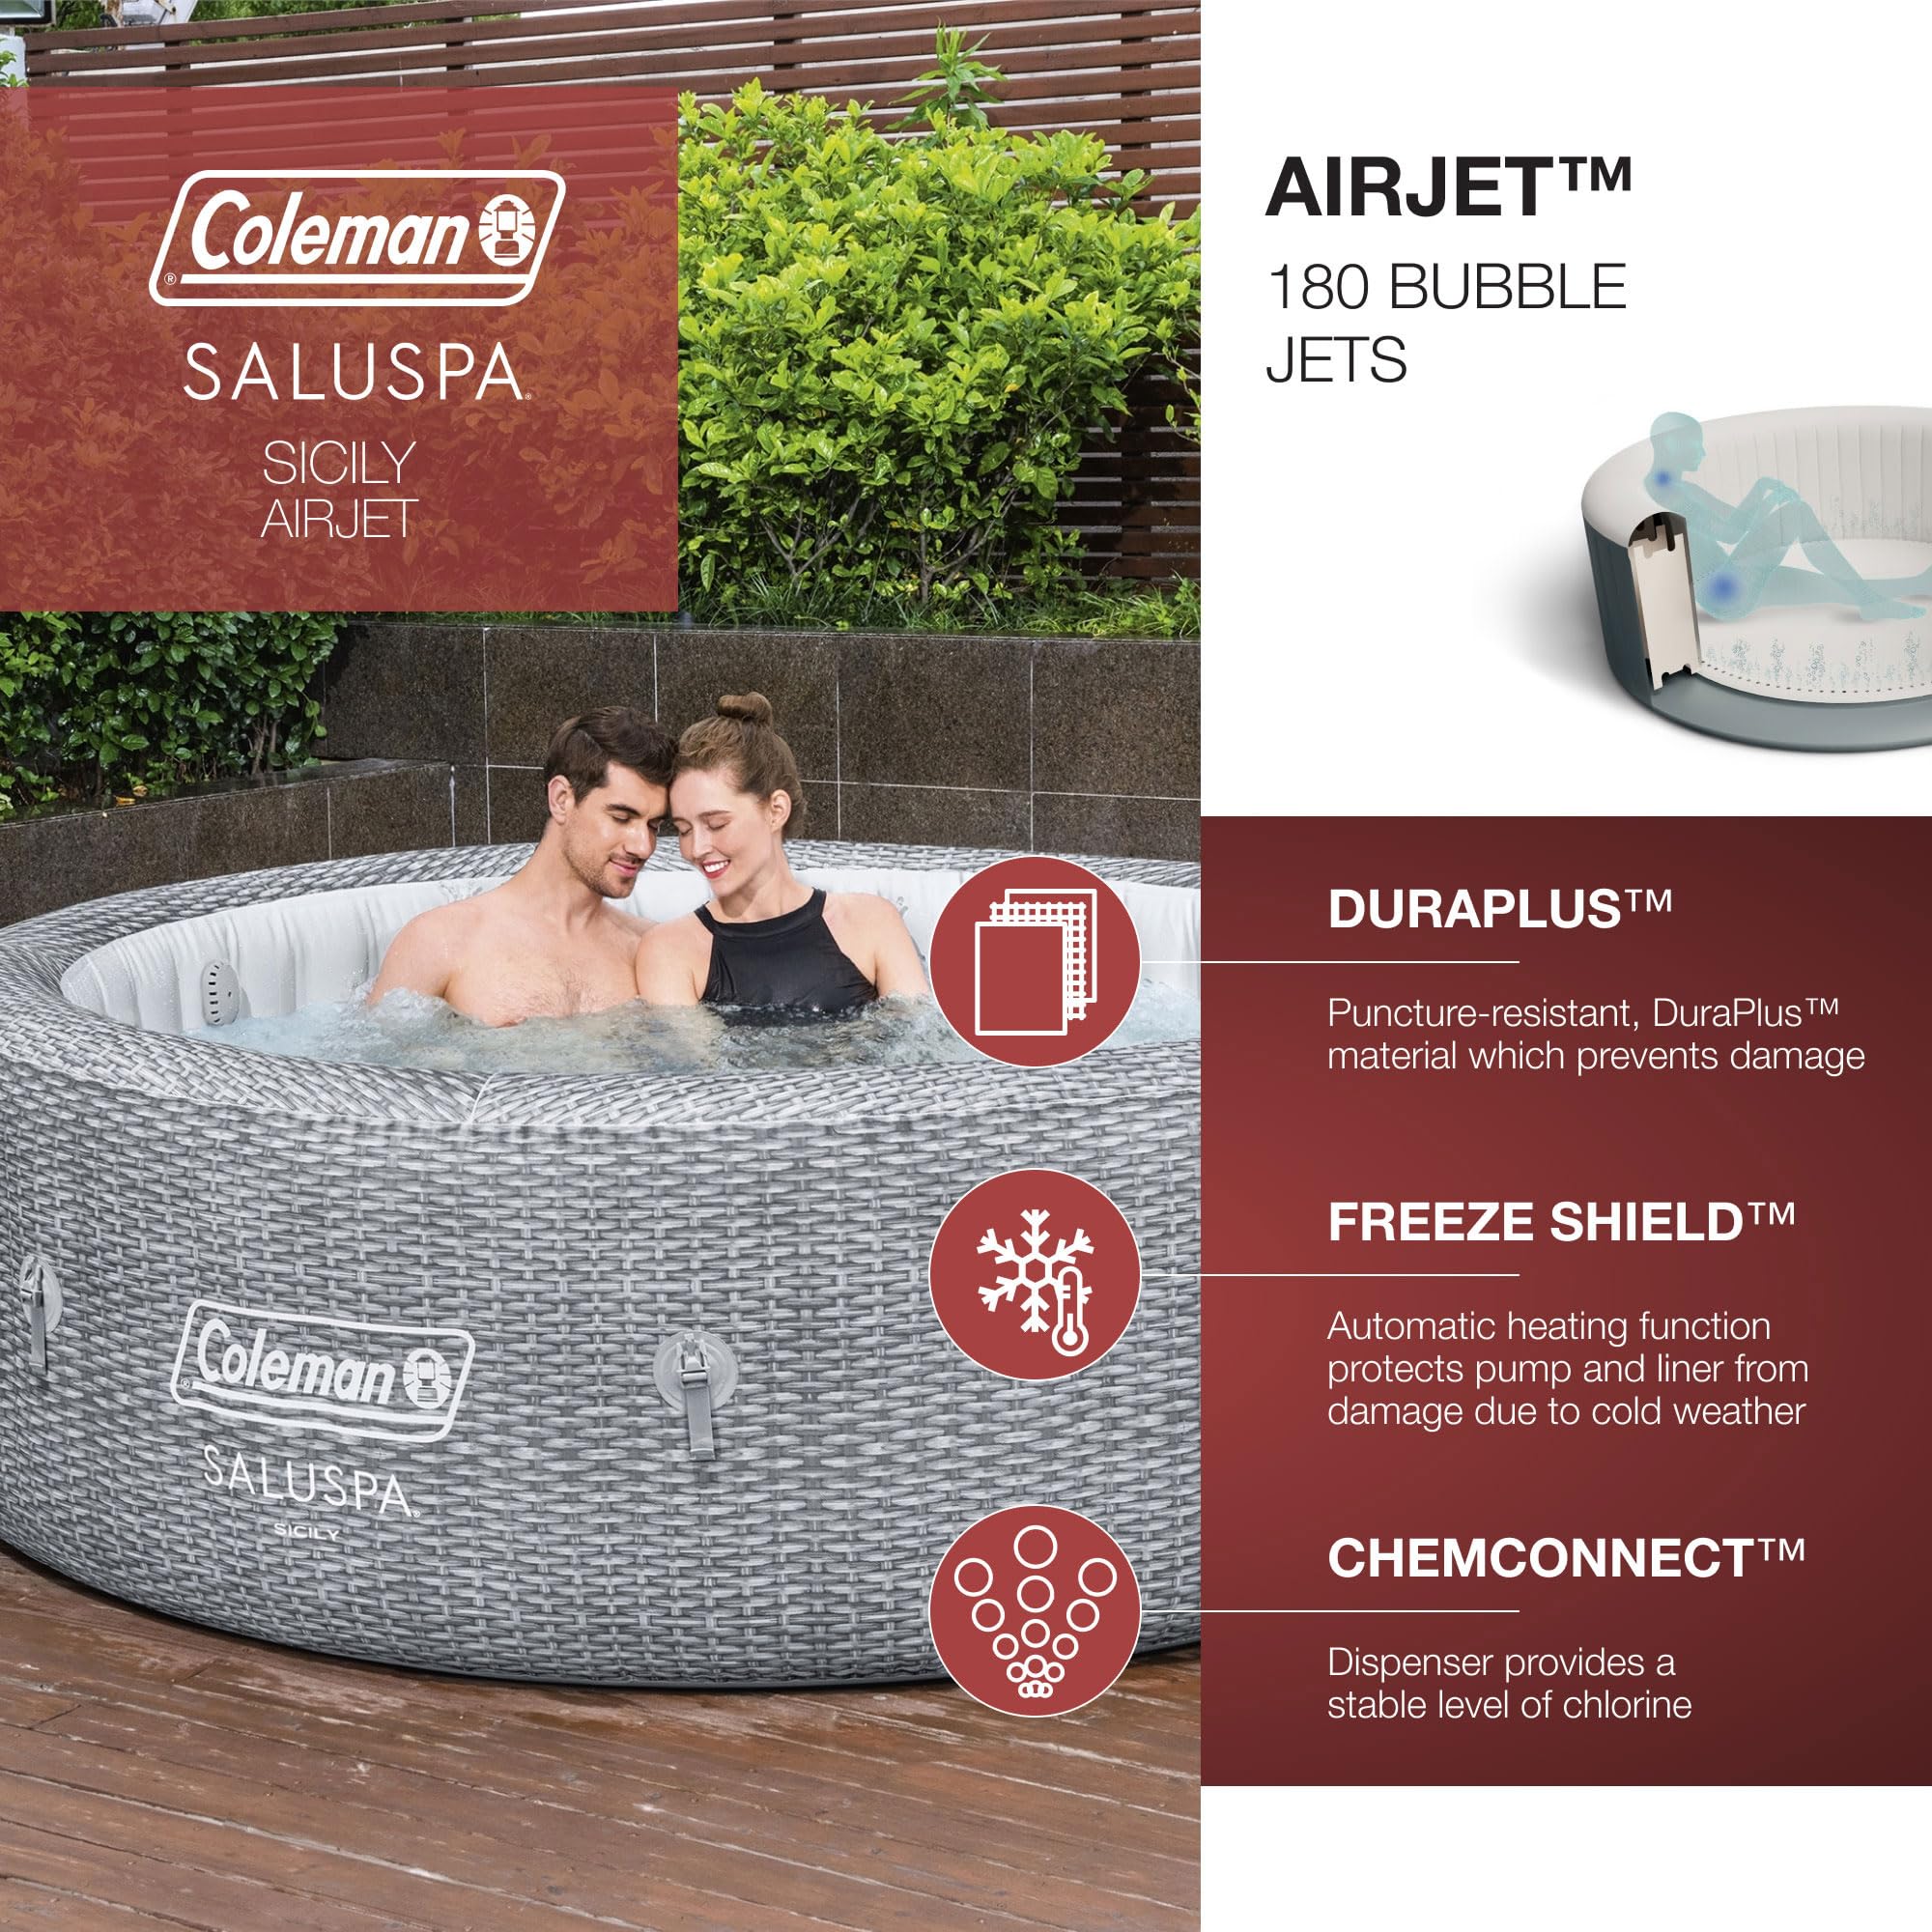 Coleman SaluSpa Sicily AirJet Hot Tub with 180 Soothing Jets with Set of 4 Bestway Underwater Non Slip Pool and Spa Seat with Adjustable Legs, Gray